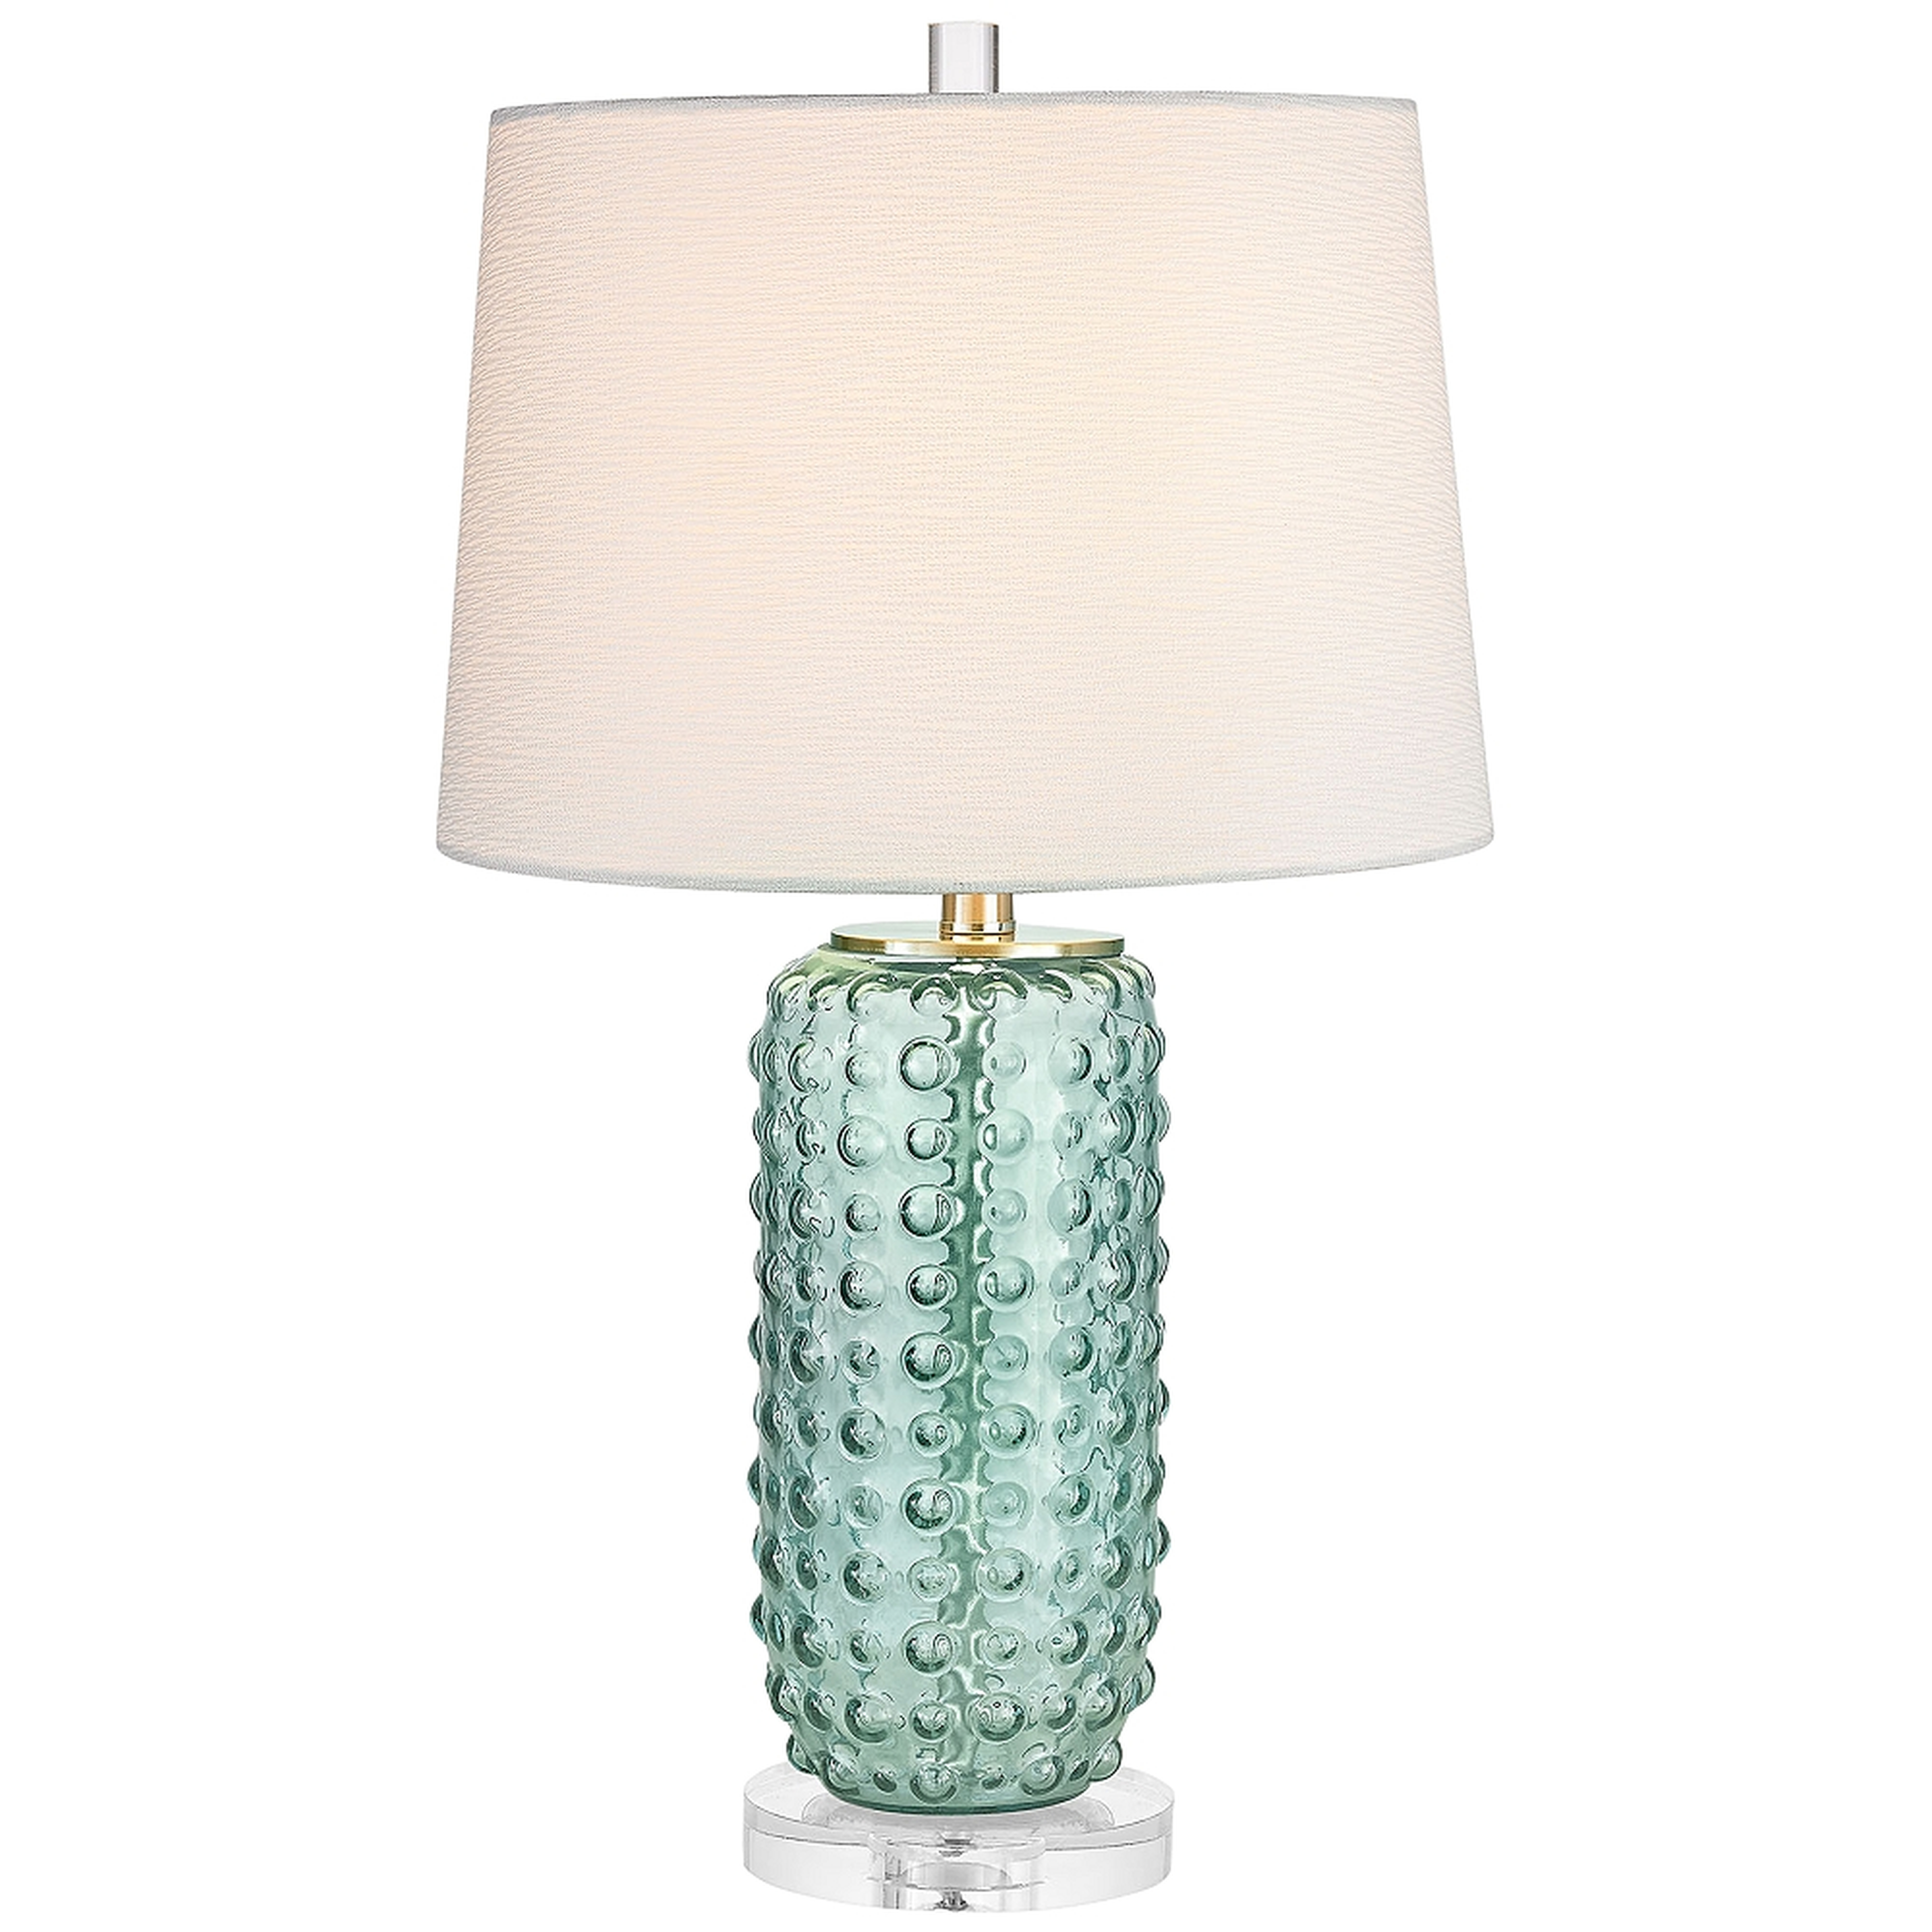 Dimond Caicos Green Glass Vase Table Lamp - Style # 842R0 - Lamps Plus